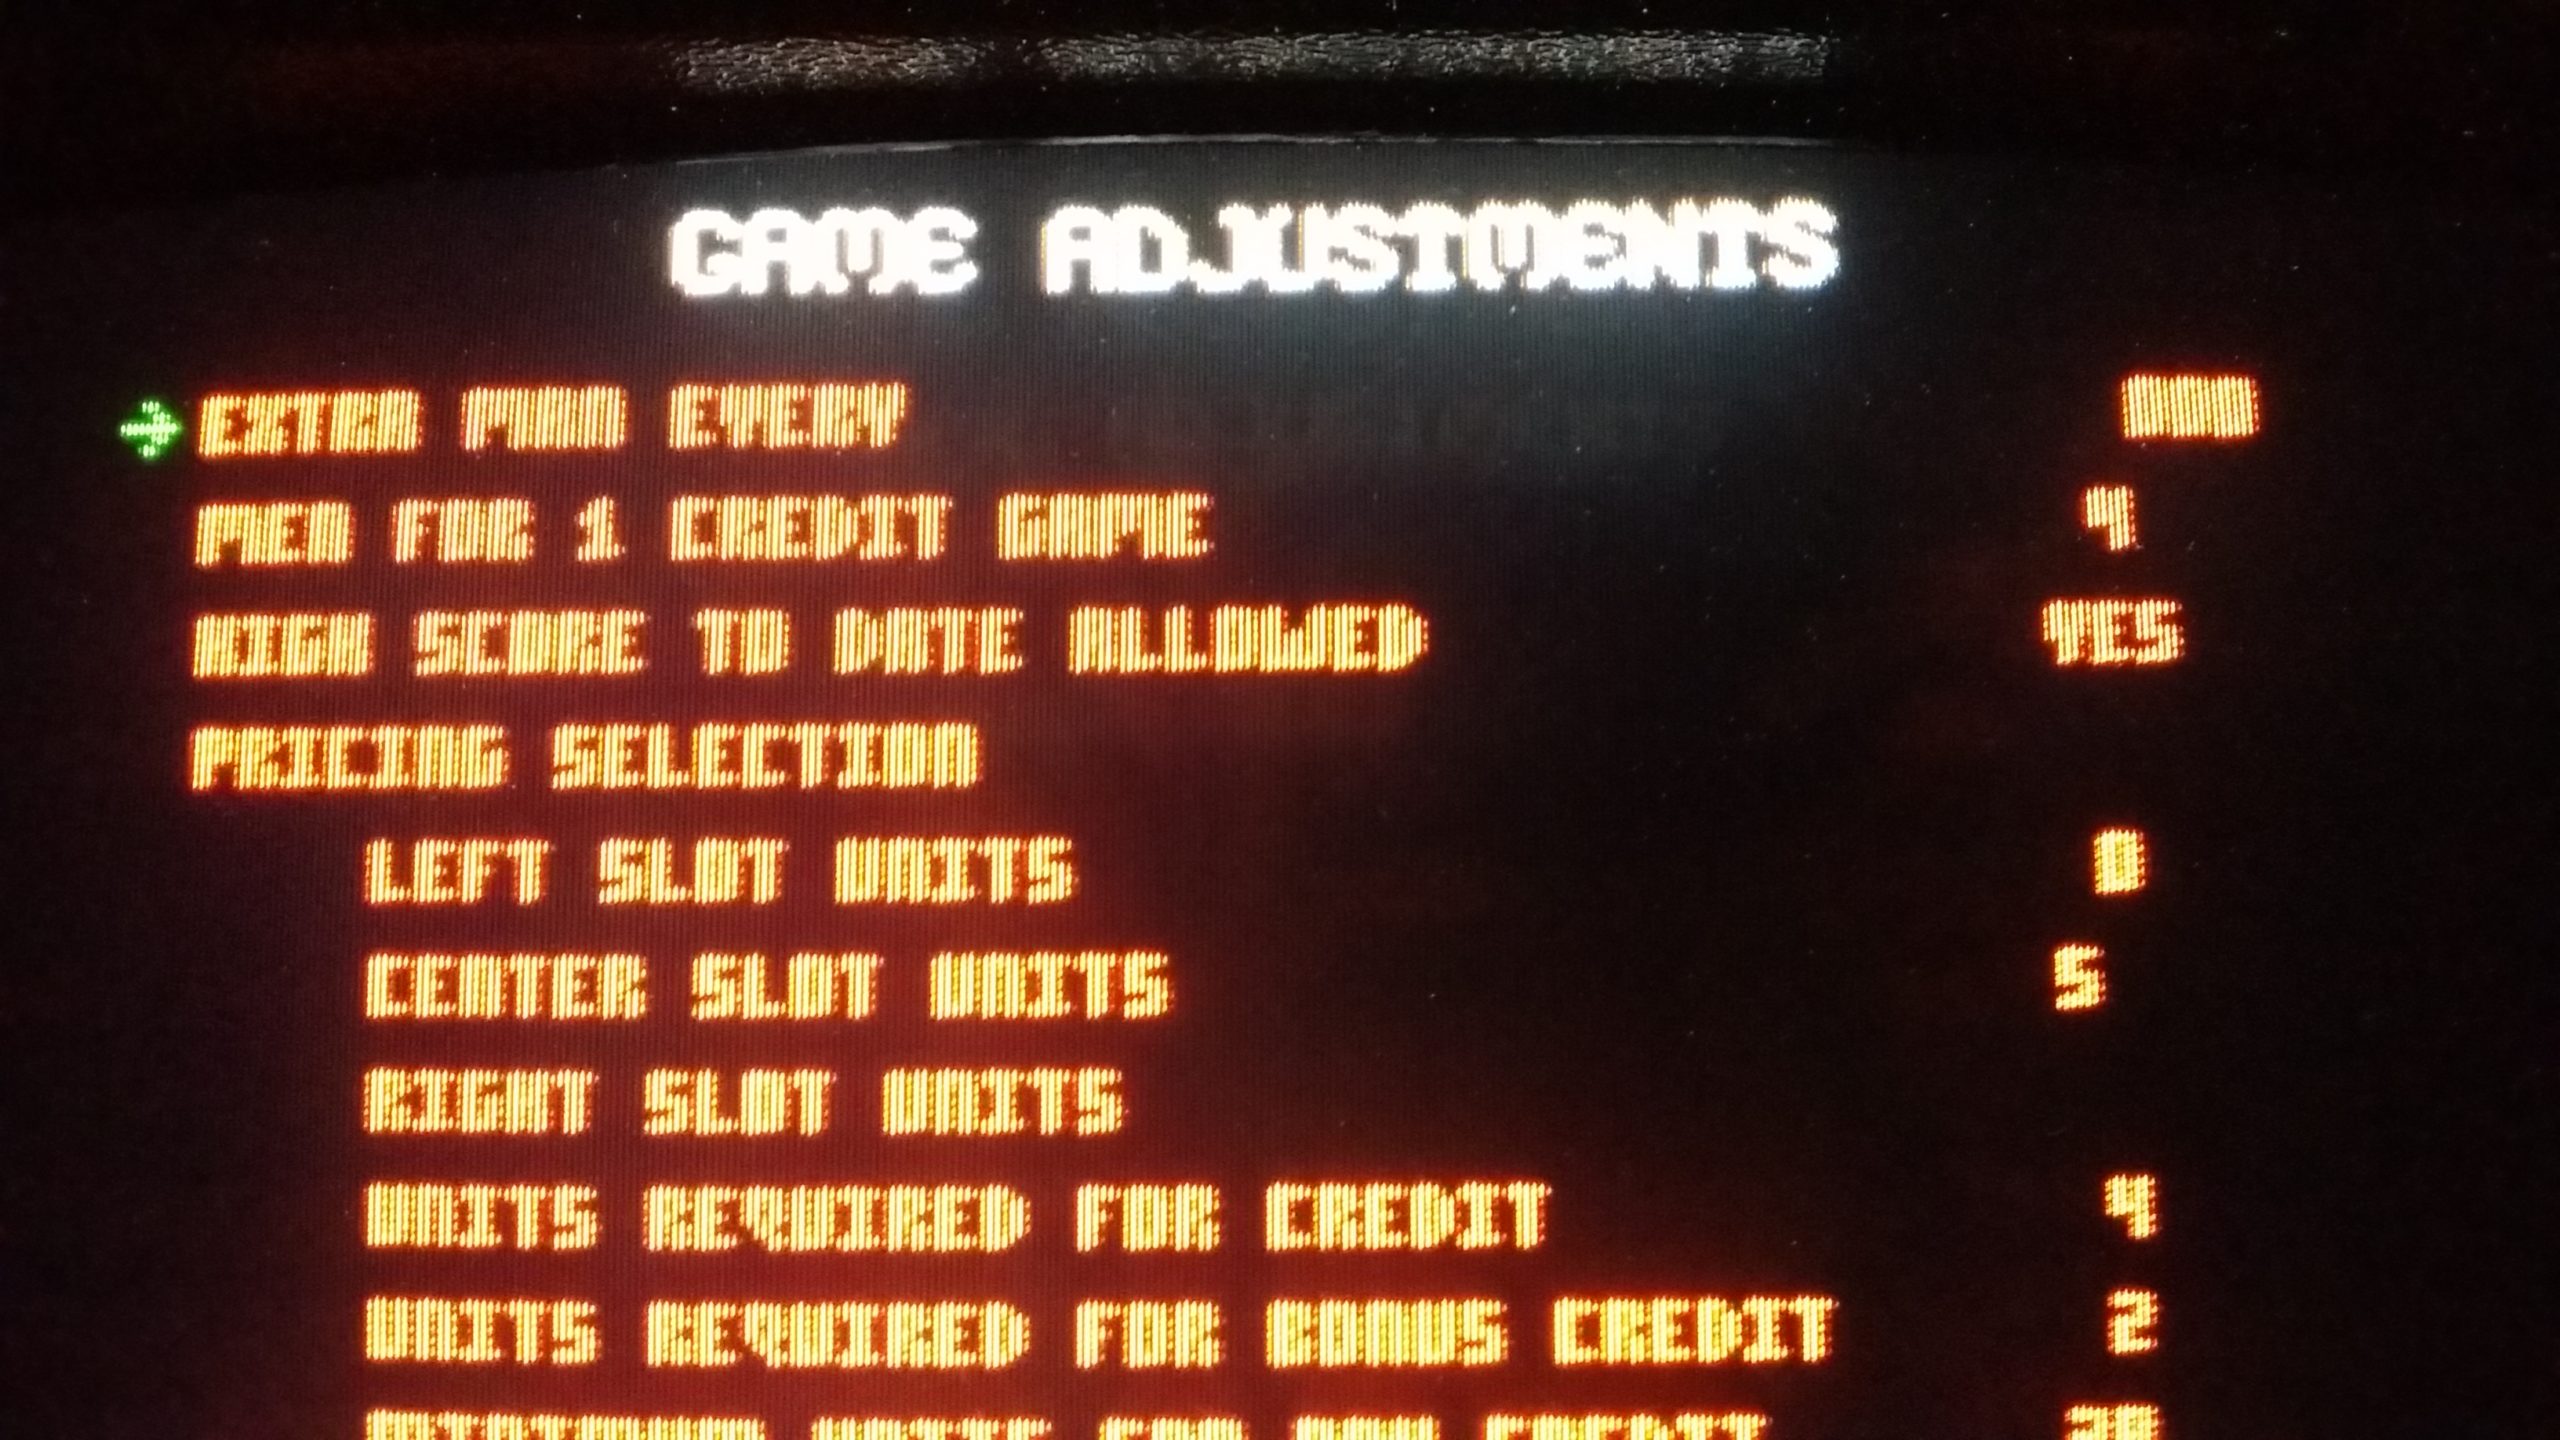 joust game adjustments screen with glitches